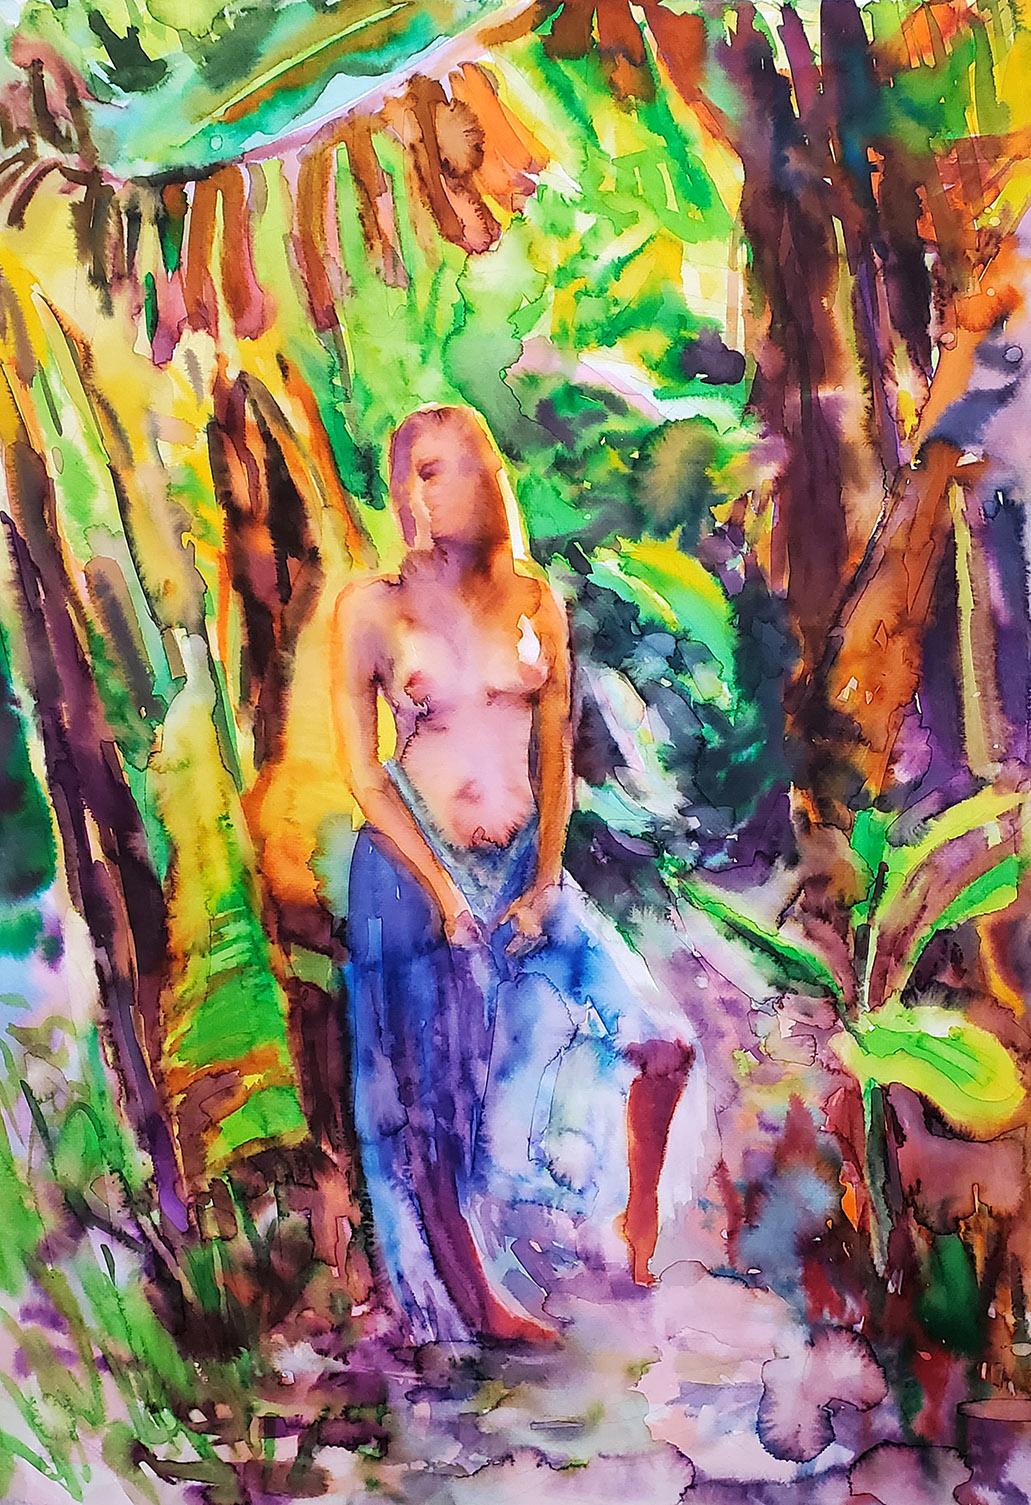  Elena Chestnykh Figurative Art - "Tropical Paradise" Figurative Painting, Watercolor, Nude, Jungle, Tropical